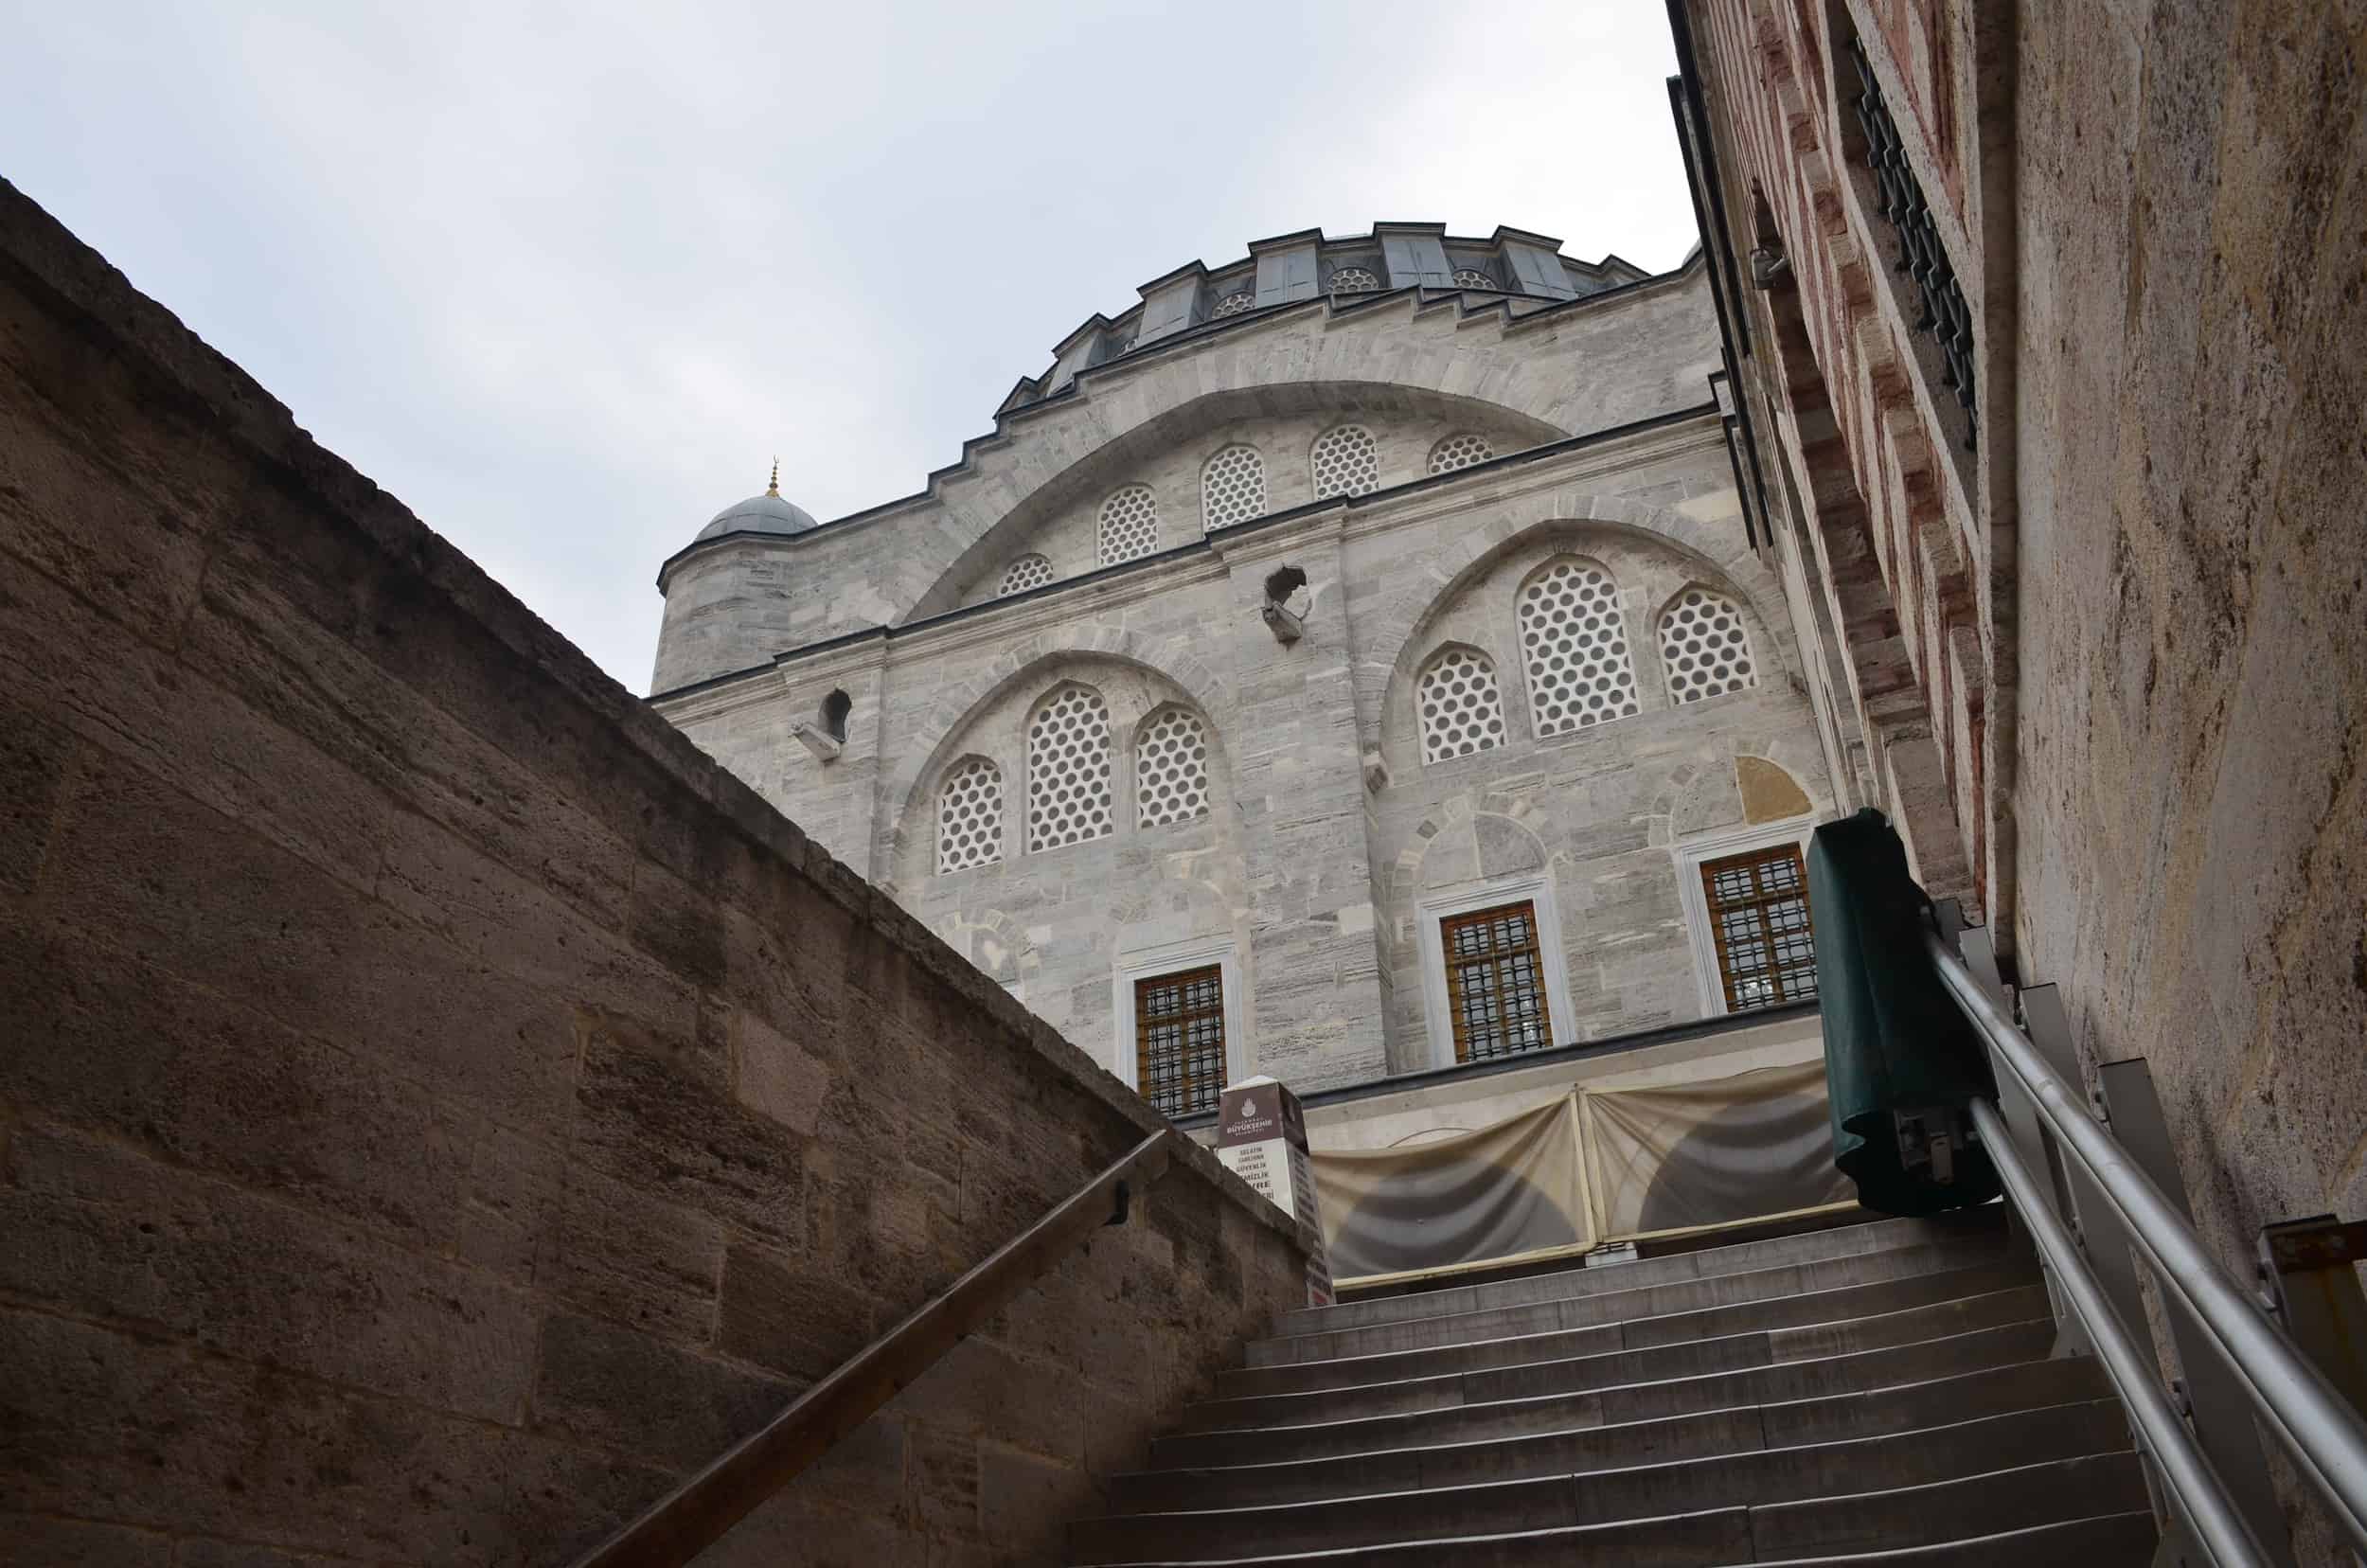 Stairs leading up to the Mihrimah Sultan Mosque